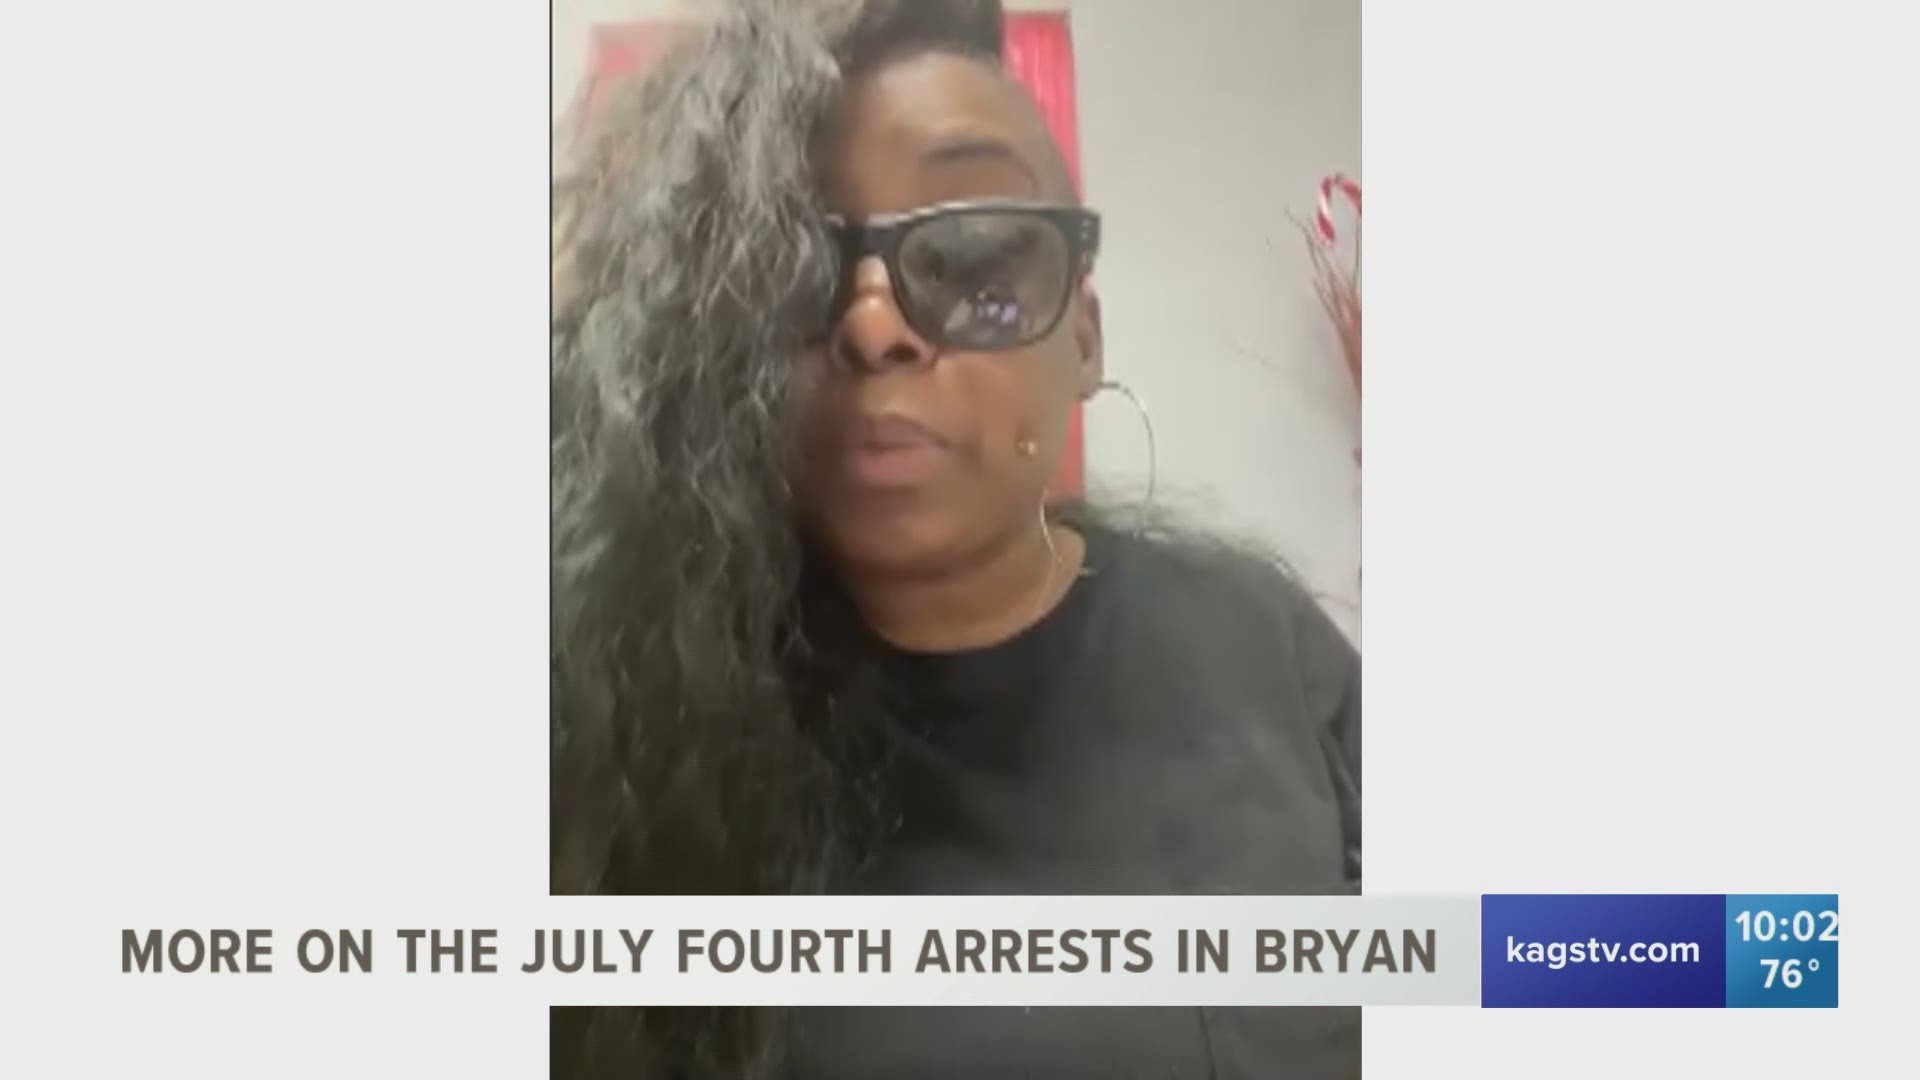 Bryan PD said it responded to that area after several calls for help, but some locals say the officers targeted that area on July 4.